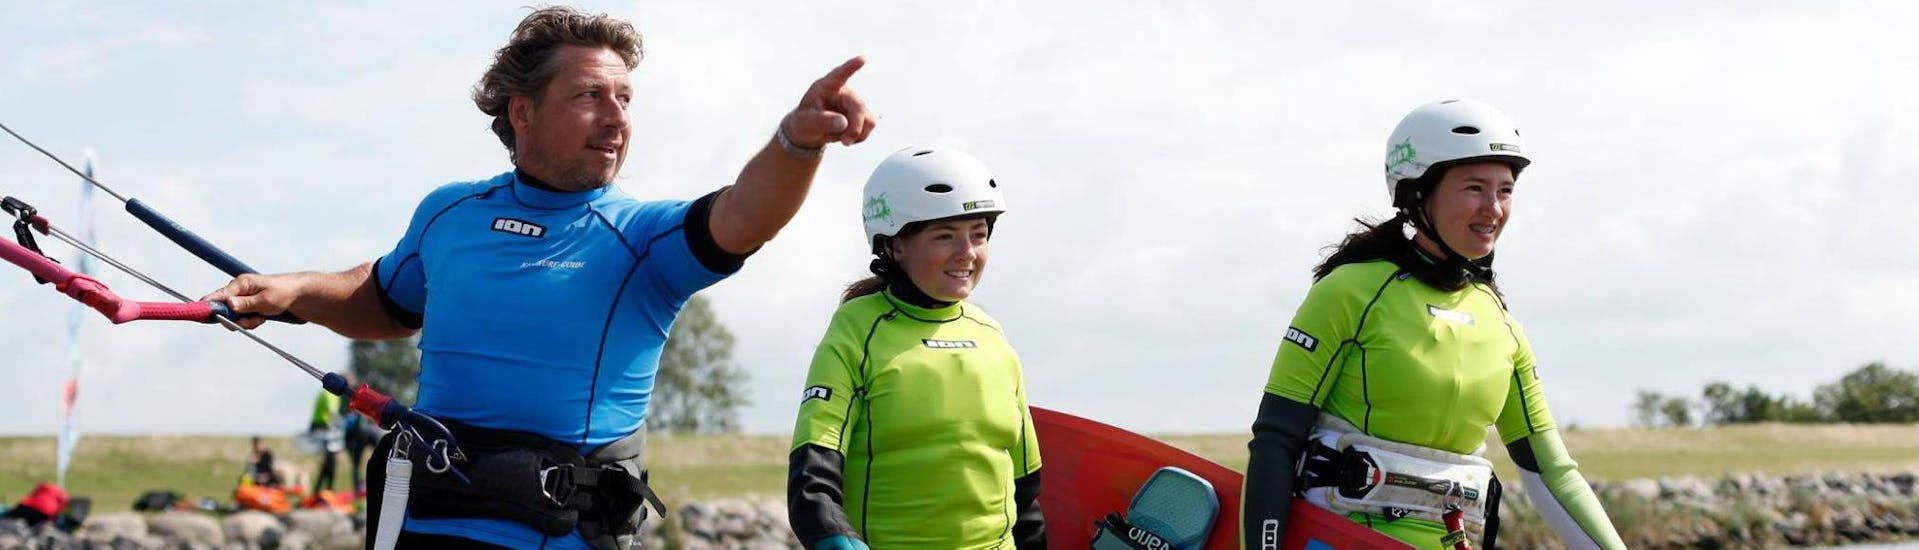 The teacher from Kitesurf-Guide Fehmarn explains his plans to his students which are taking the Kitesurfing Lessons "Rising Star" from 8 years in Fehmarn. 